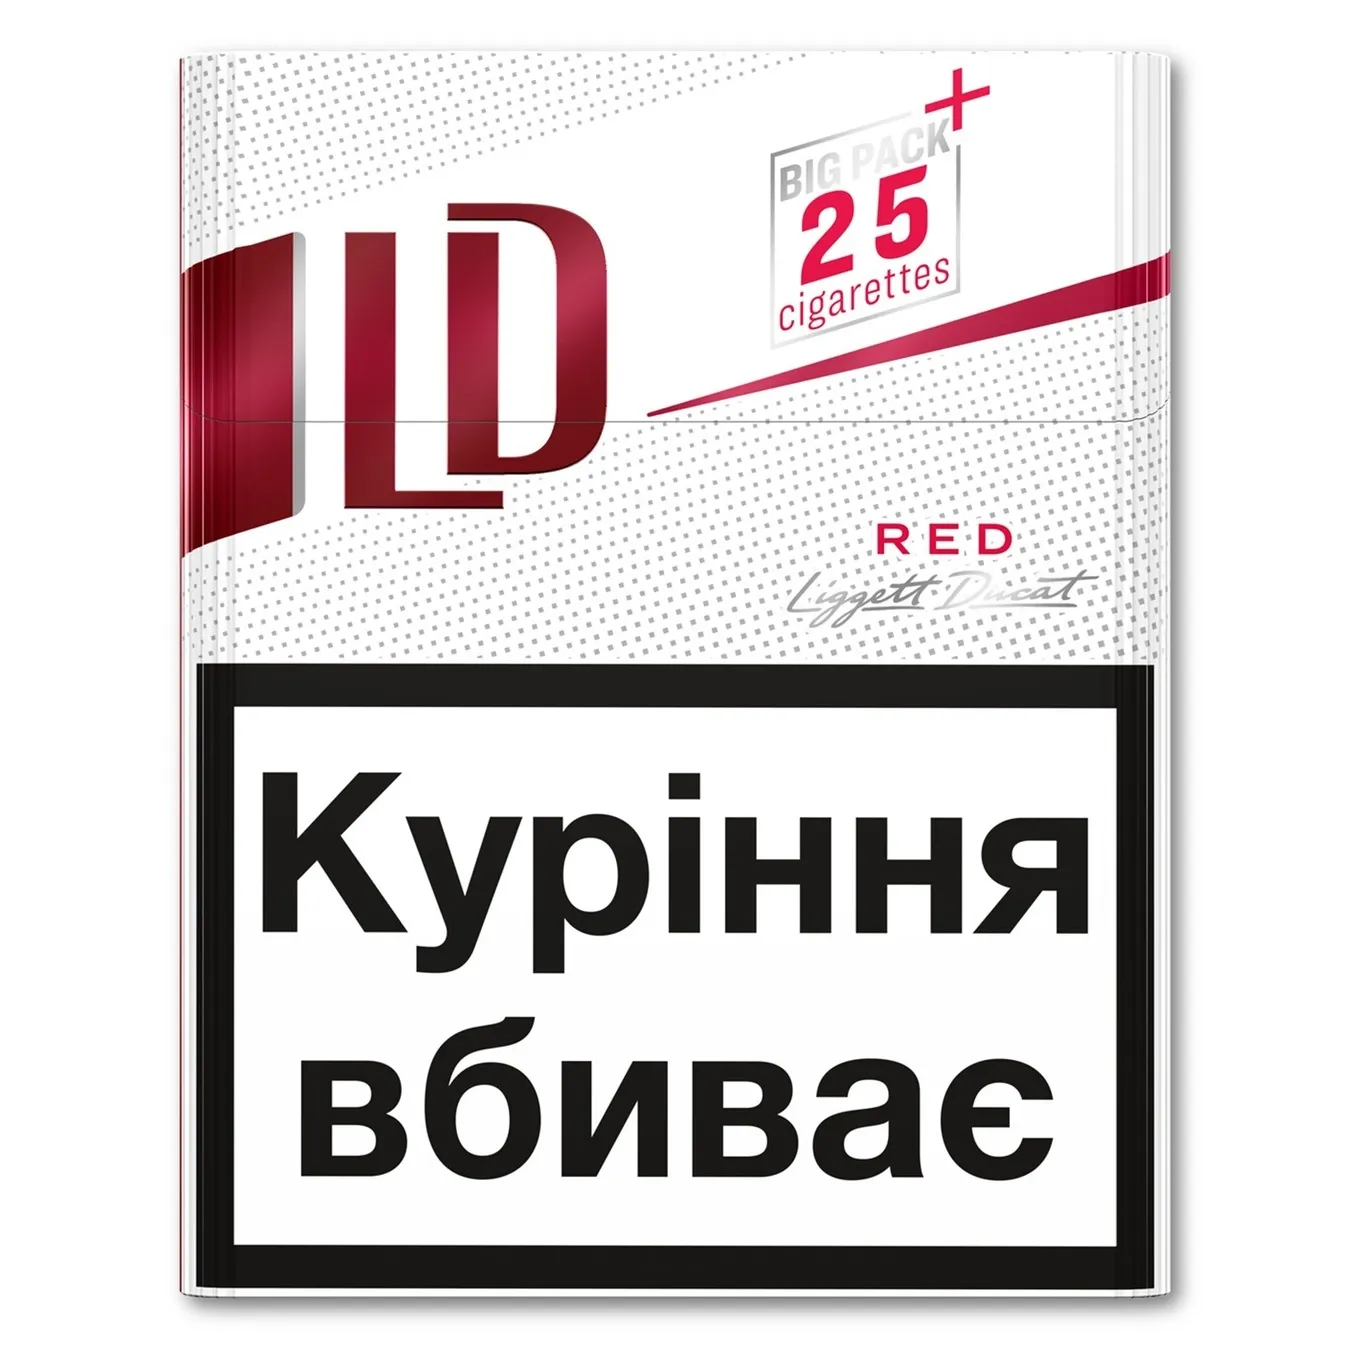 Cigarettes LD Red 20 pcs (the price is indicated without excise tax)